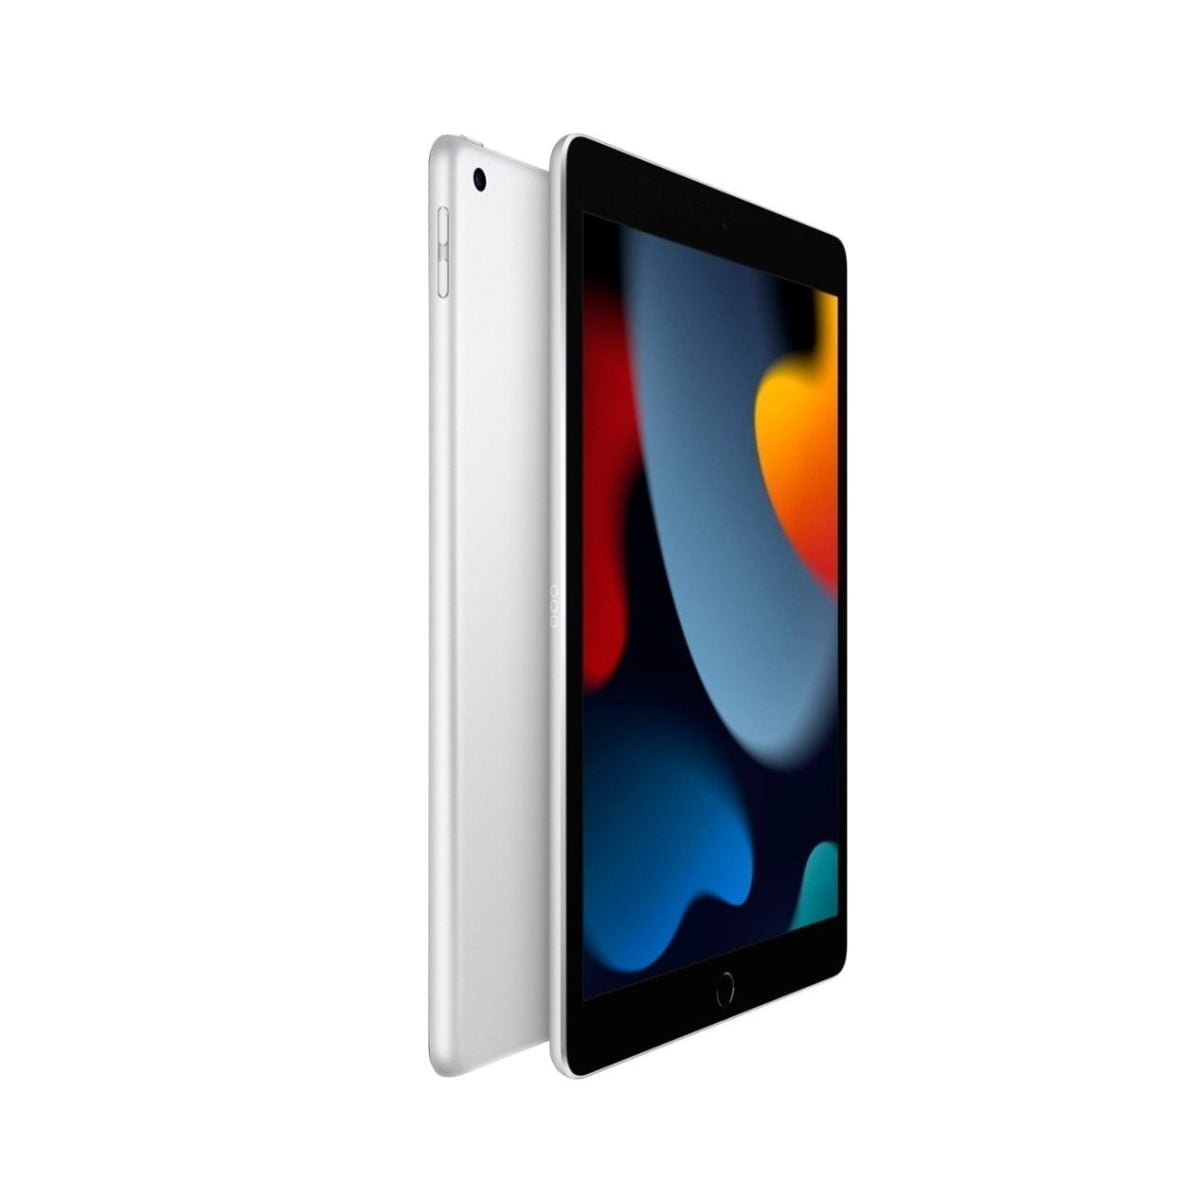 4901868Cv11D Apple &Lt;H1&Gt;Apple 10.2-Inch Ipad (9Th Generation) With Wi-Fi - 256Gb - Silver (Bundle Of 2)&Lt;/H1&Gt; Https://Www.youtube.com/Watch?V=Loaocx5Xc9S Powerful. Easy To Use. Versatile. The New Ipad Has A Beautiful 10.2-Inch Retina Display, Powerful A13 Bionic Chip, An Ultra Wide Front Camera With Center Stage, And Works With Apple Pencil And The Smart Keyboard.¹ Ipad Lets You Do More, More Easily. All For An Incredible Value. Ipad Apple 10.2 Inch Ipad (9Th Generation) Wi-Fi 256Gb - Silver (Bundle Of 2)10Th